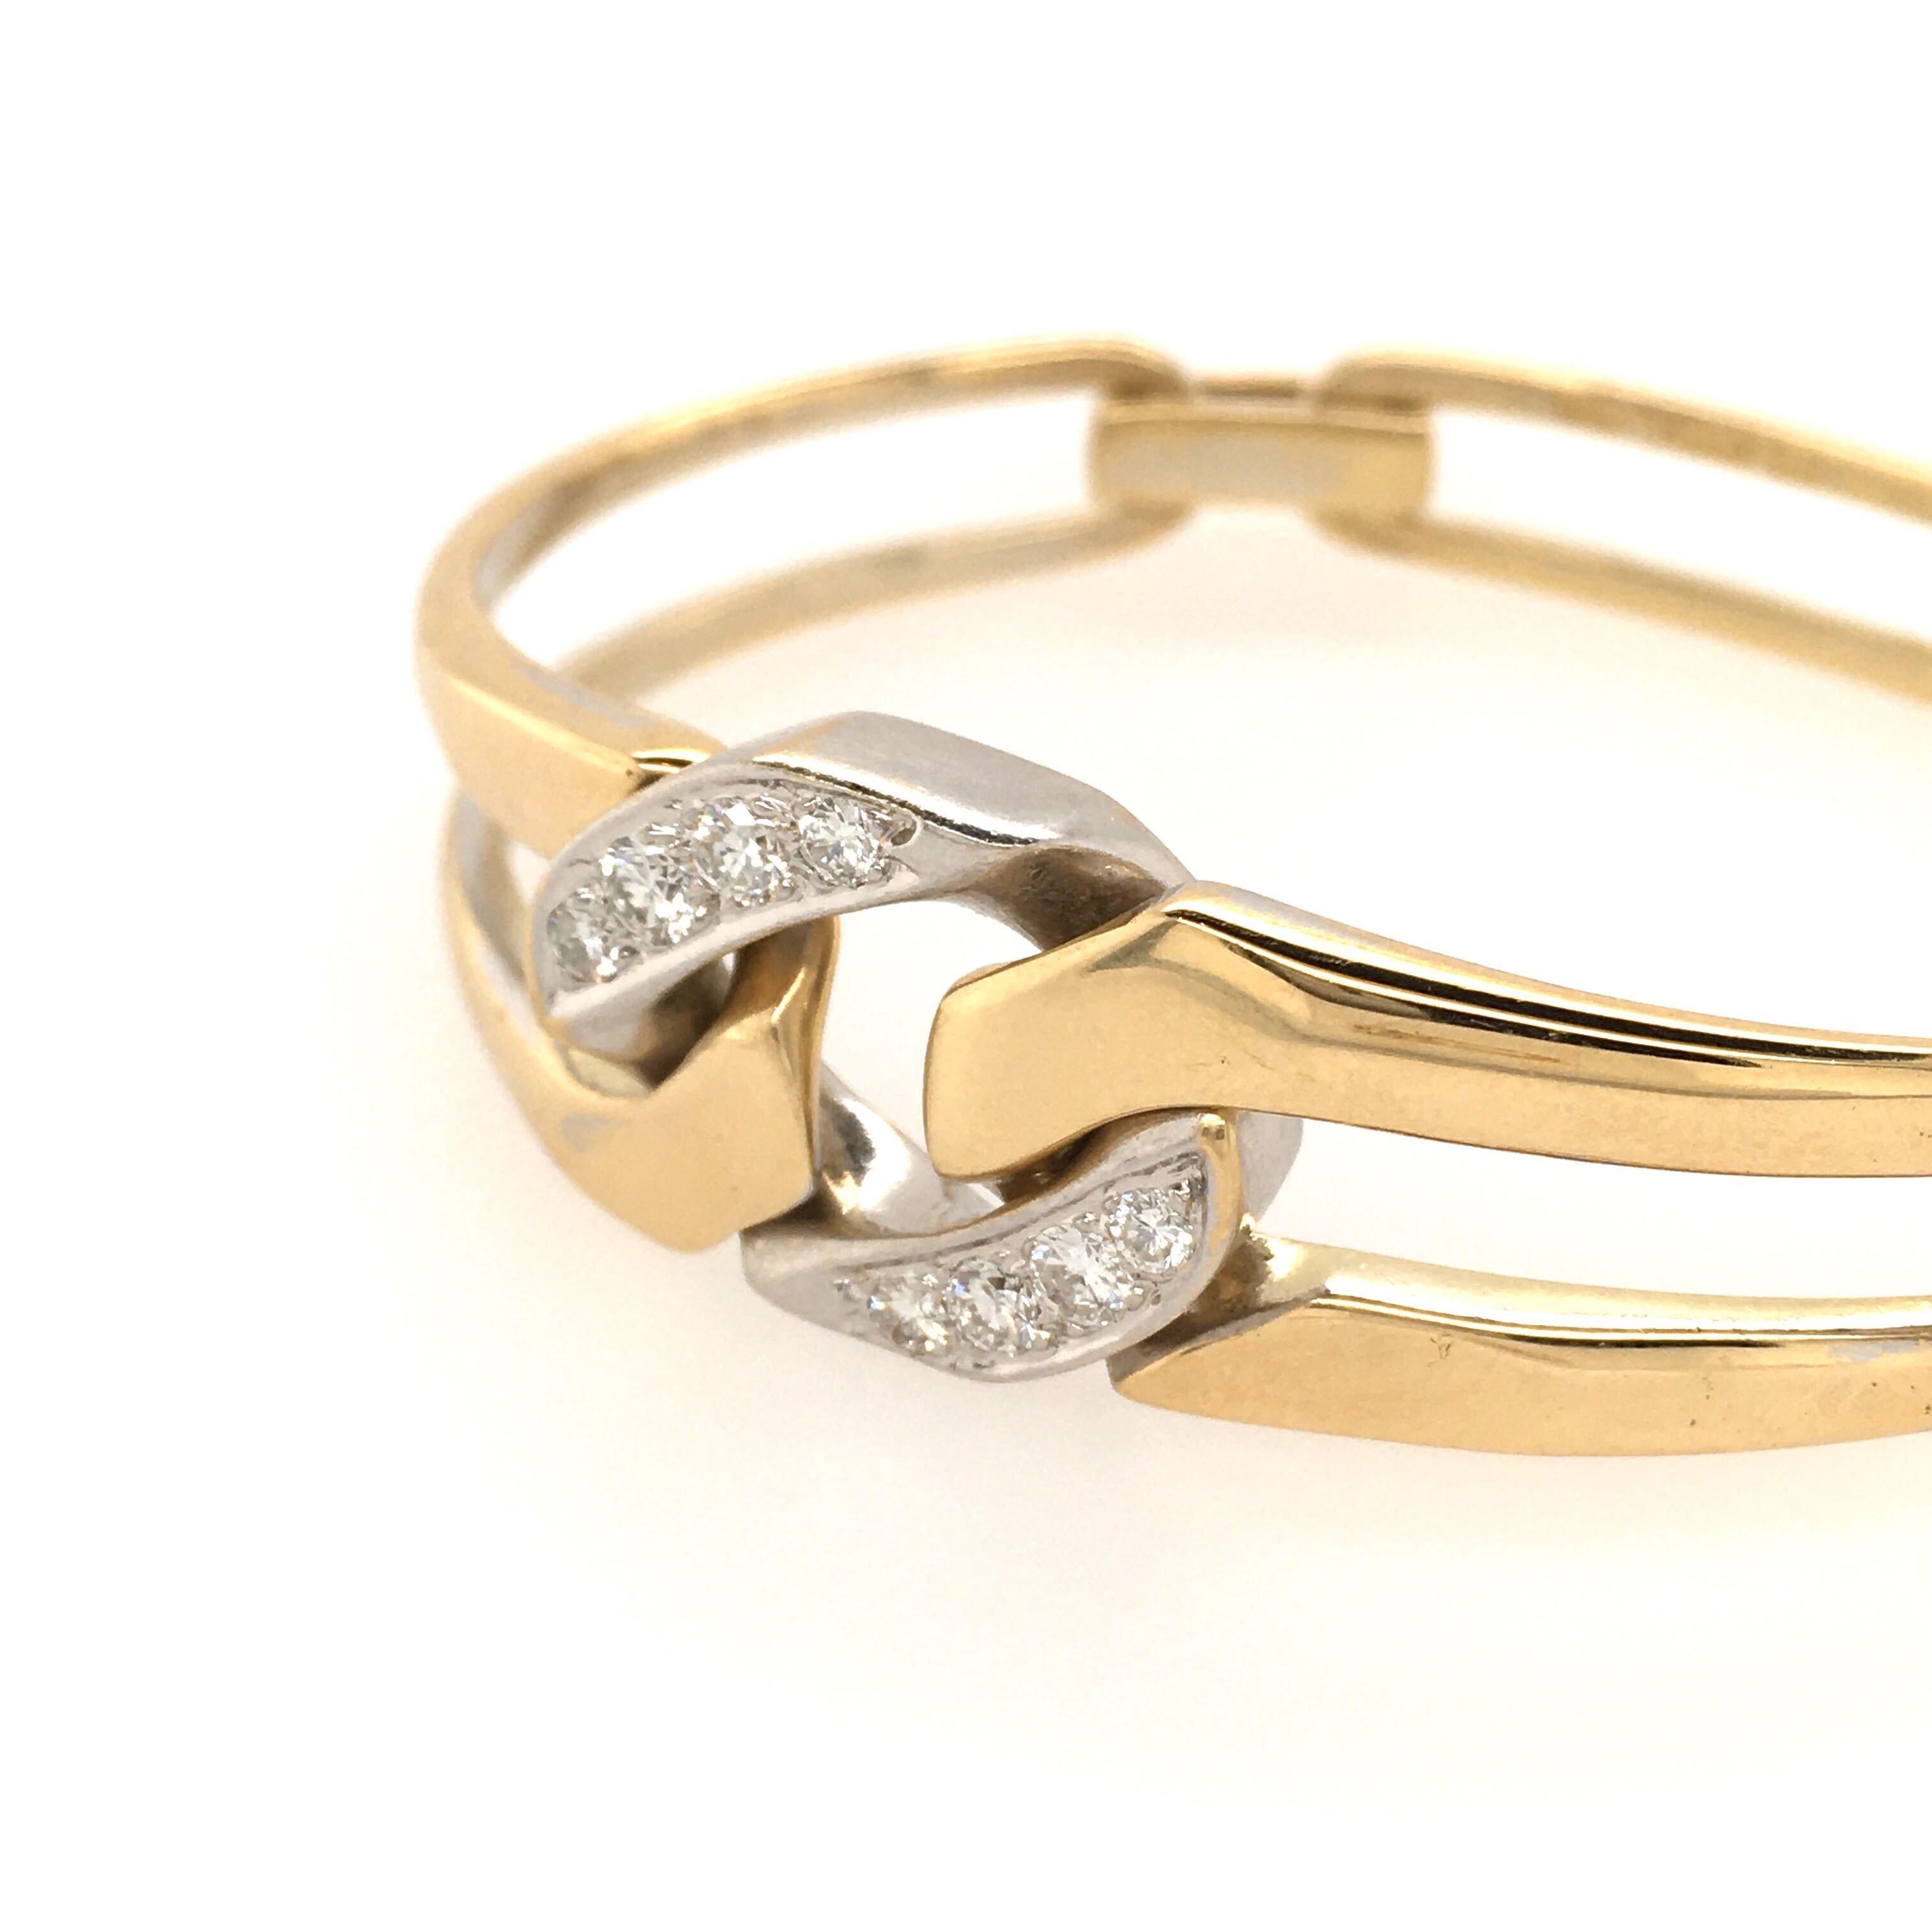 An 18 karat yellow gold and diamond bracelet. Italian. Designed as a tapering polished openwork bangle, set to the top with a pave set diamond curb link. Width is approximately 5/8 inches at widest, gross weight is approximately 32.2 grams. 